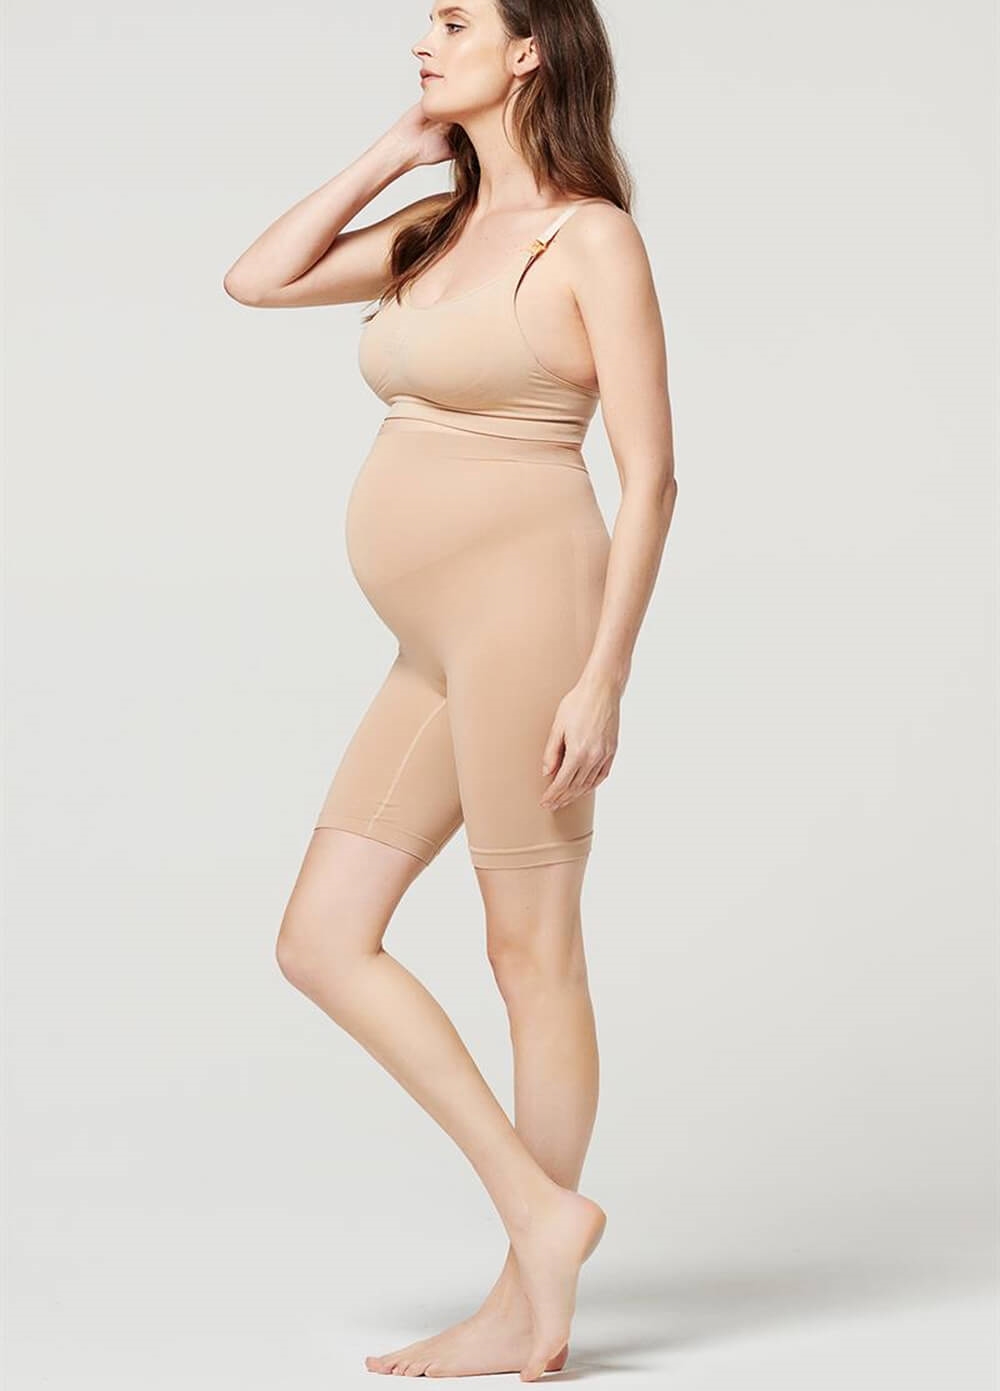 Herzmutter Maternity Slip Pregnancy Leggings with Long Leg Beige-Black 5500 Supporting Seamless Overbump Shorts Perfect for Pregnancy 